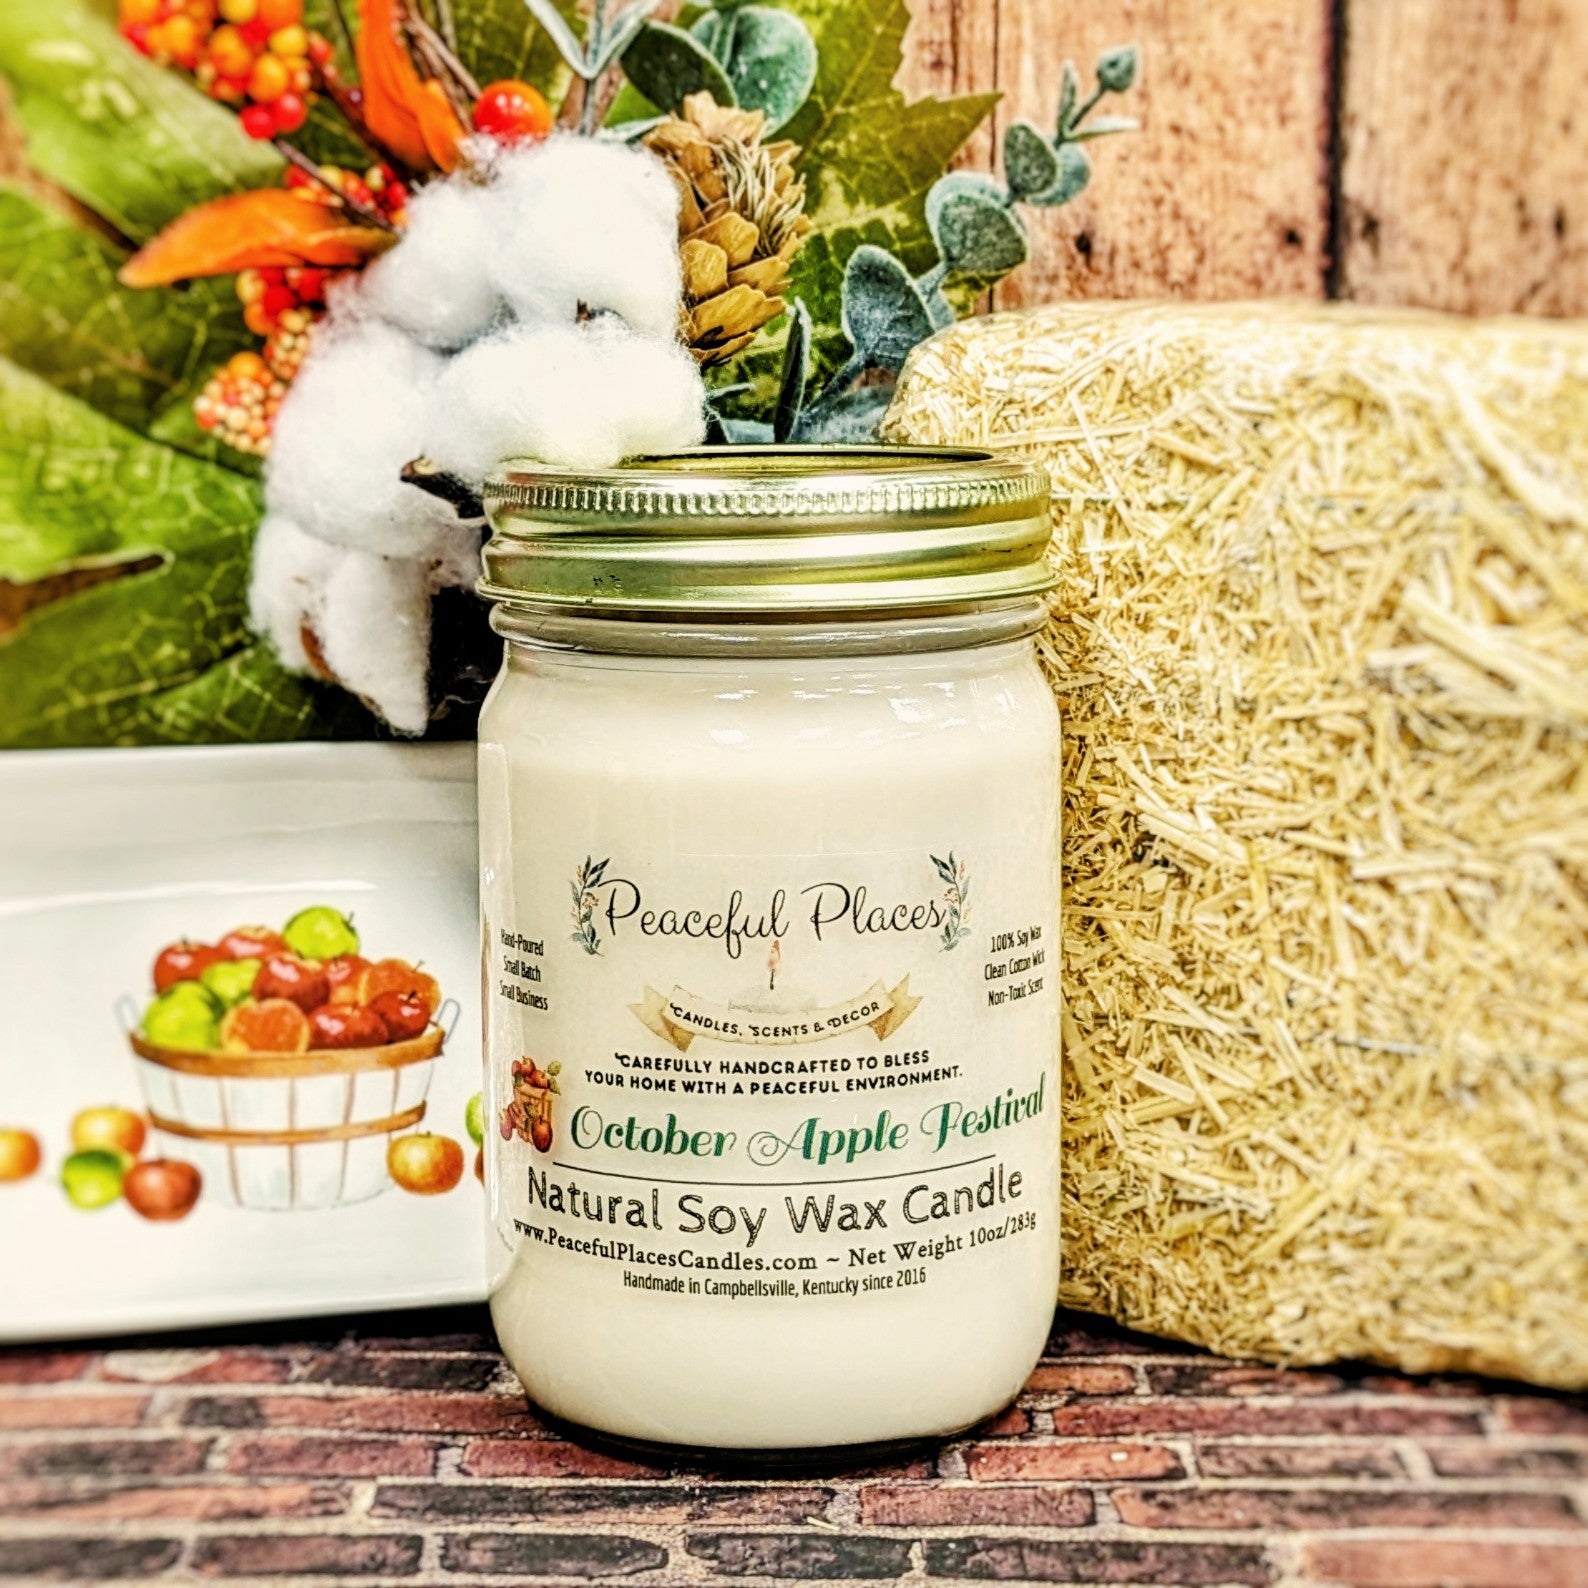 Finding Non-Toxic Candles